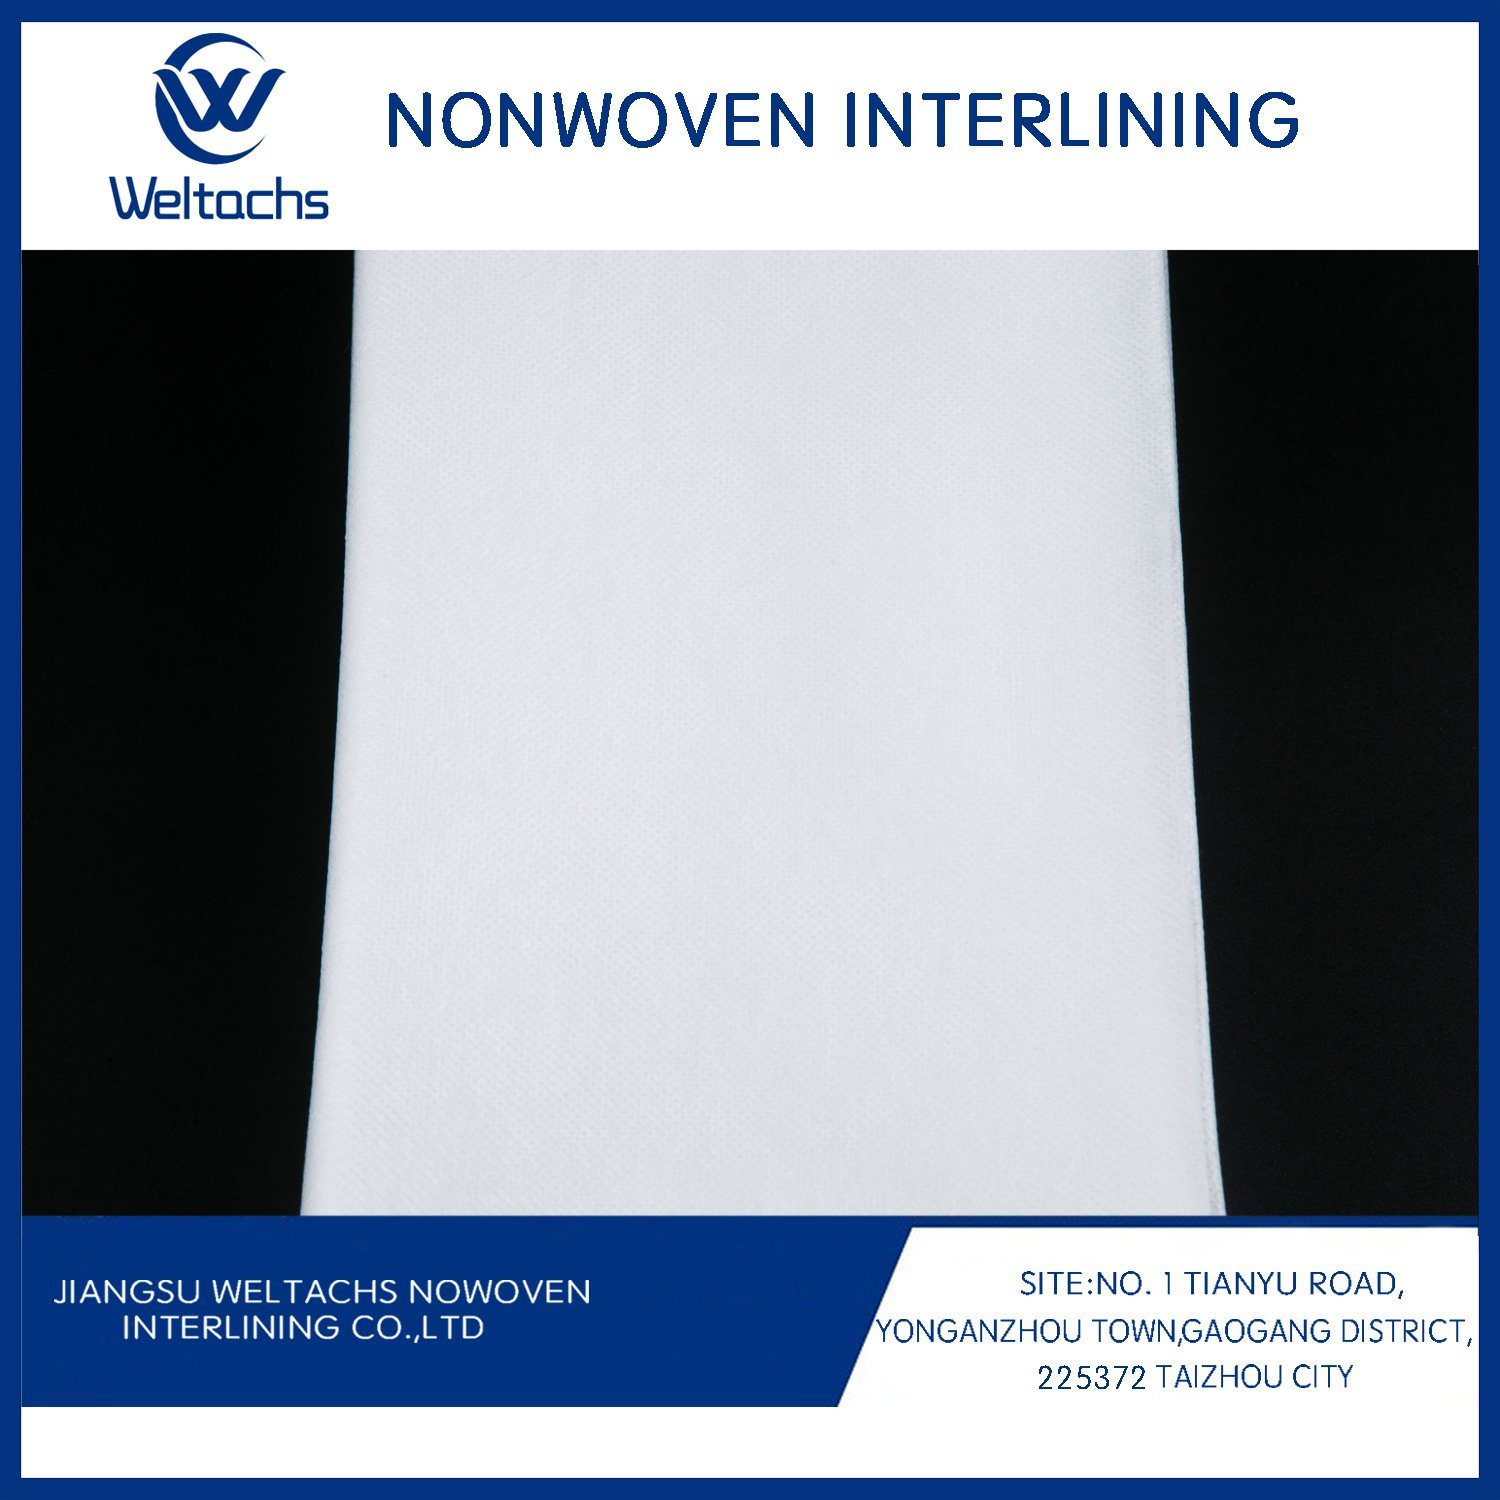 Hot Sale Professional Lower Price 6075 Woven Interlining for Quilts for Sale